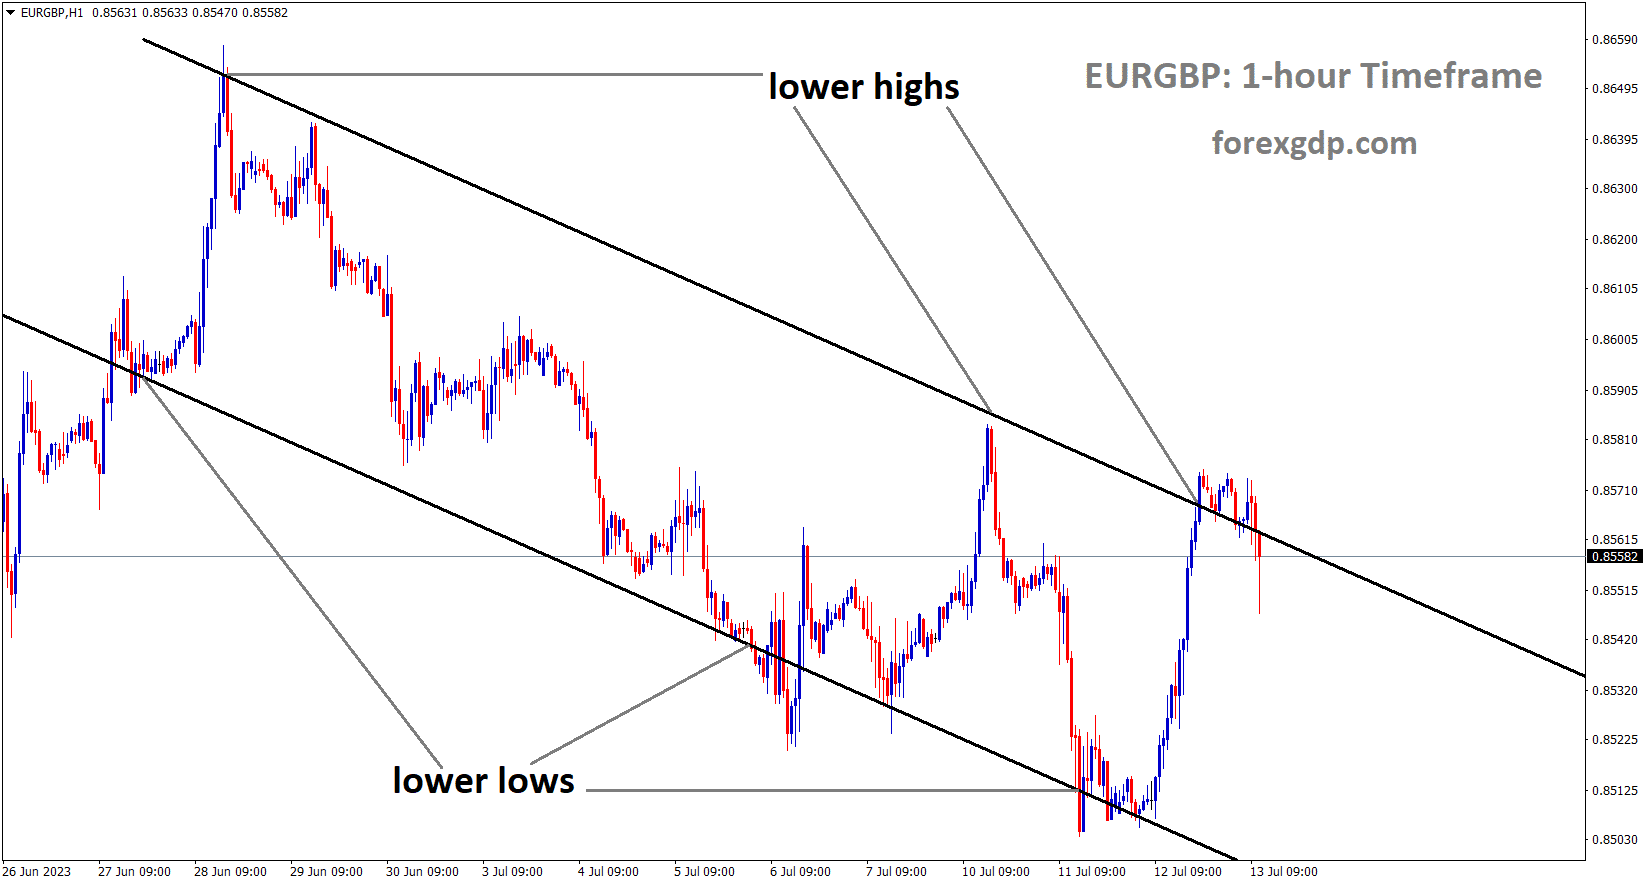 EURGBP is moving in the Descending channel and the market has reached the lower high area of the channel 3